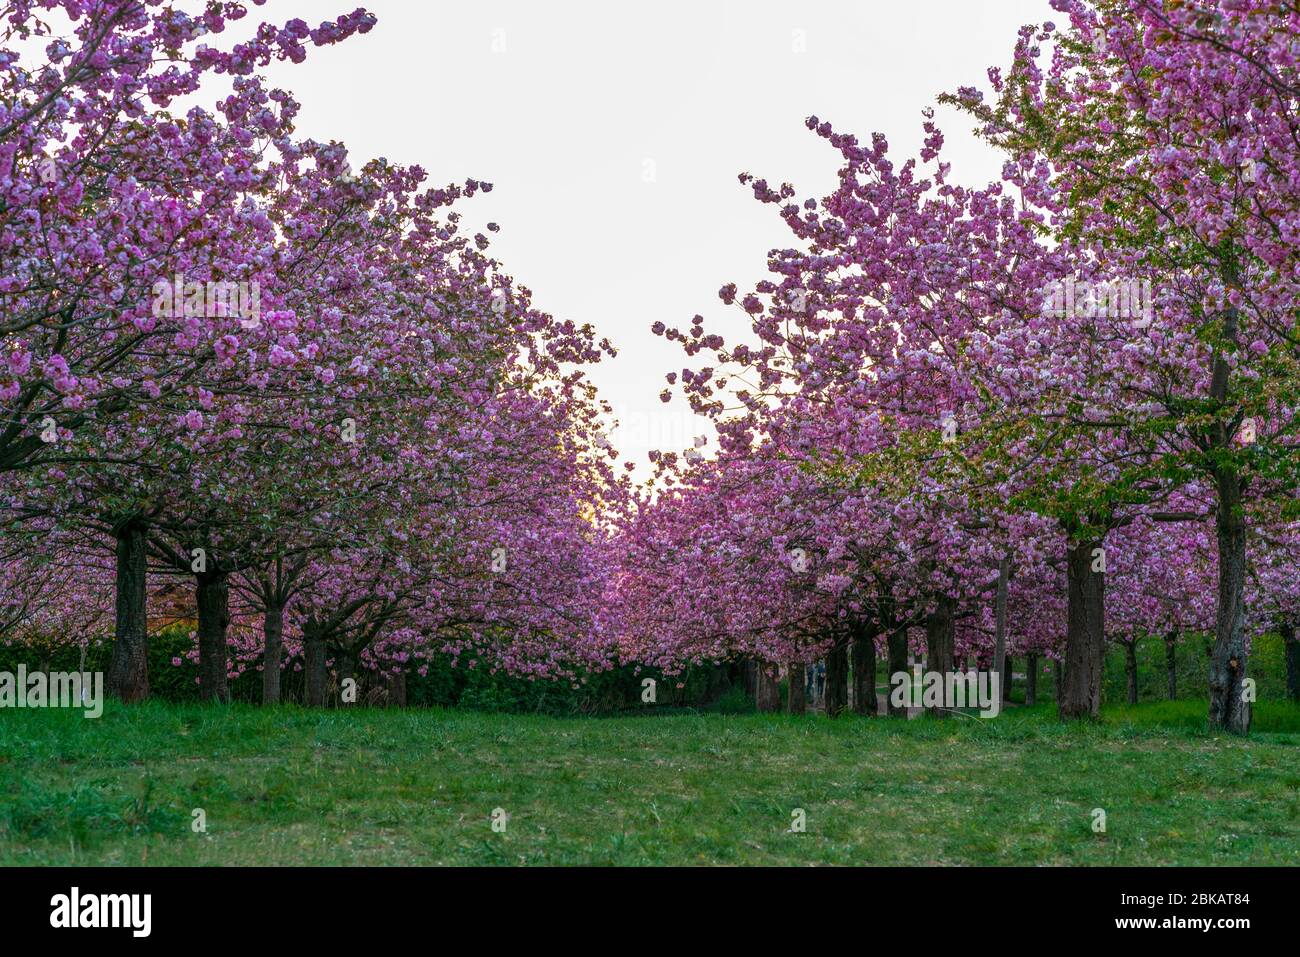 Cherry blossom at the TV-Asahi-Alley in Teltow, Germany Stock Photo